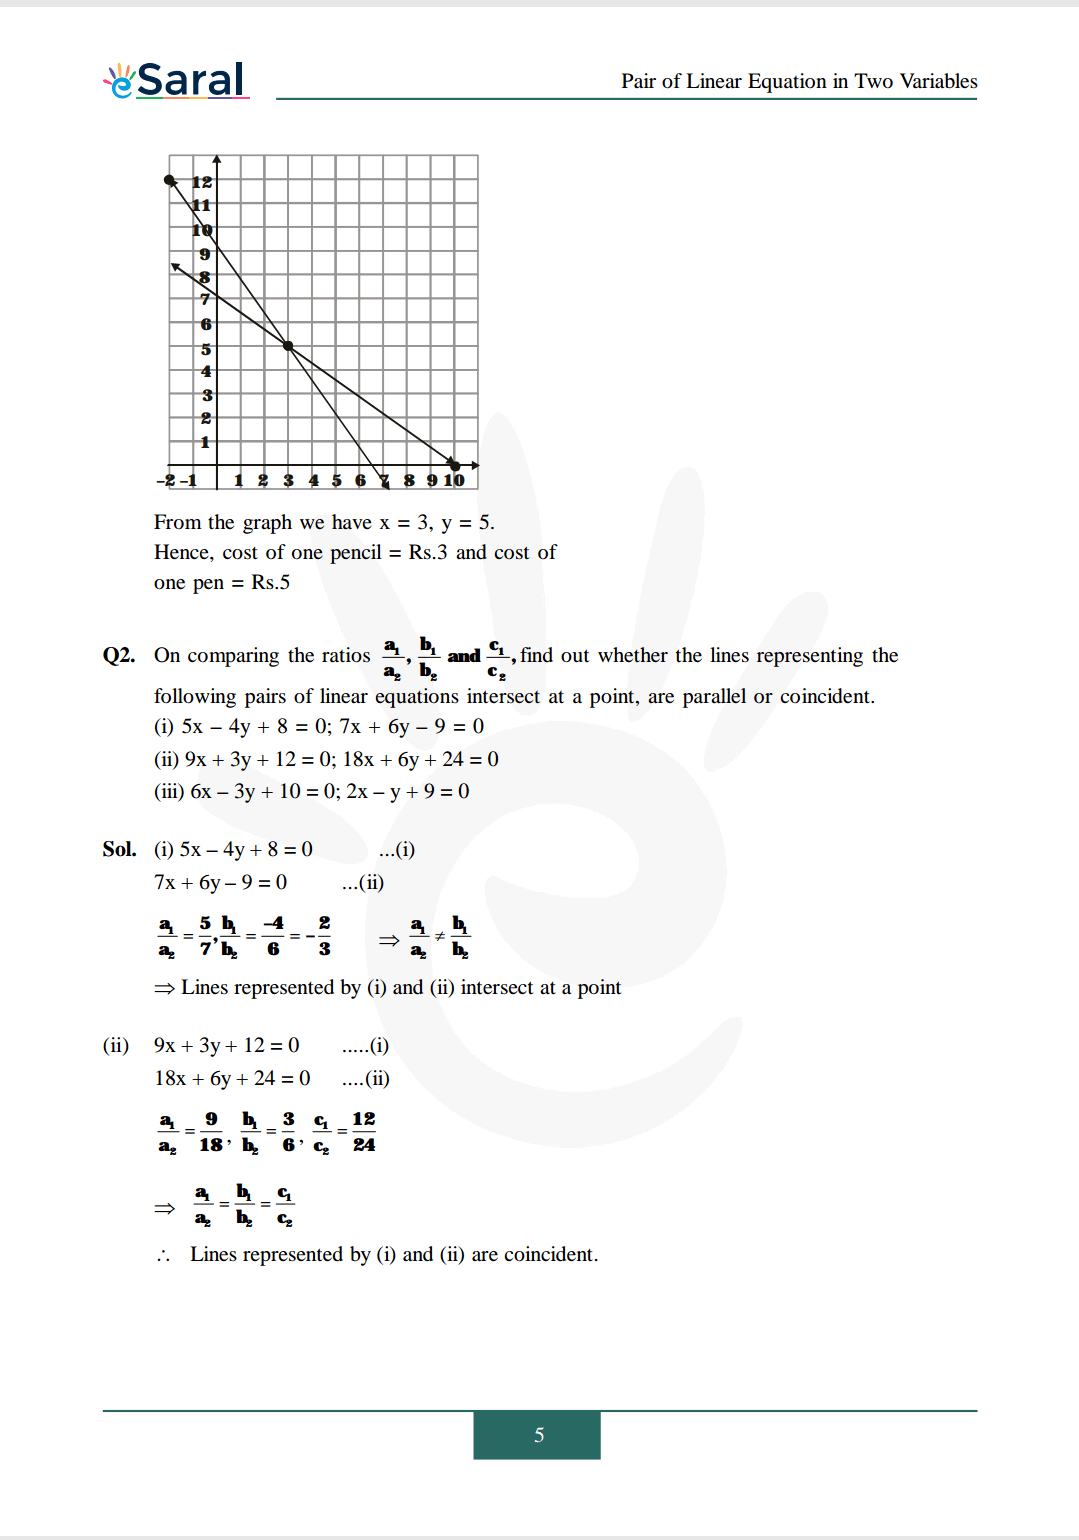 Class 10 Maths Chapter 3 exercise 3.2 solutions Image 2